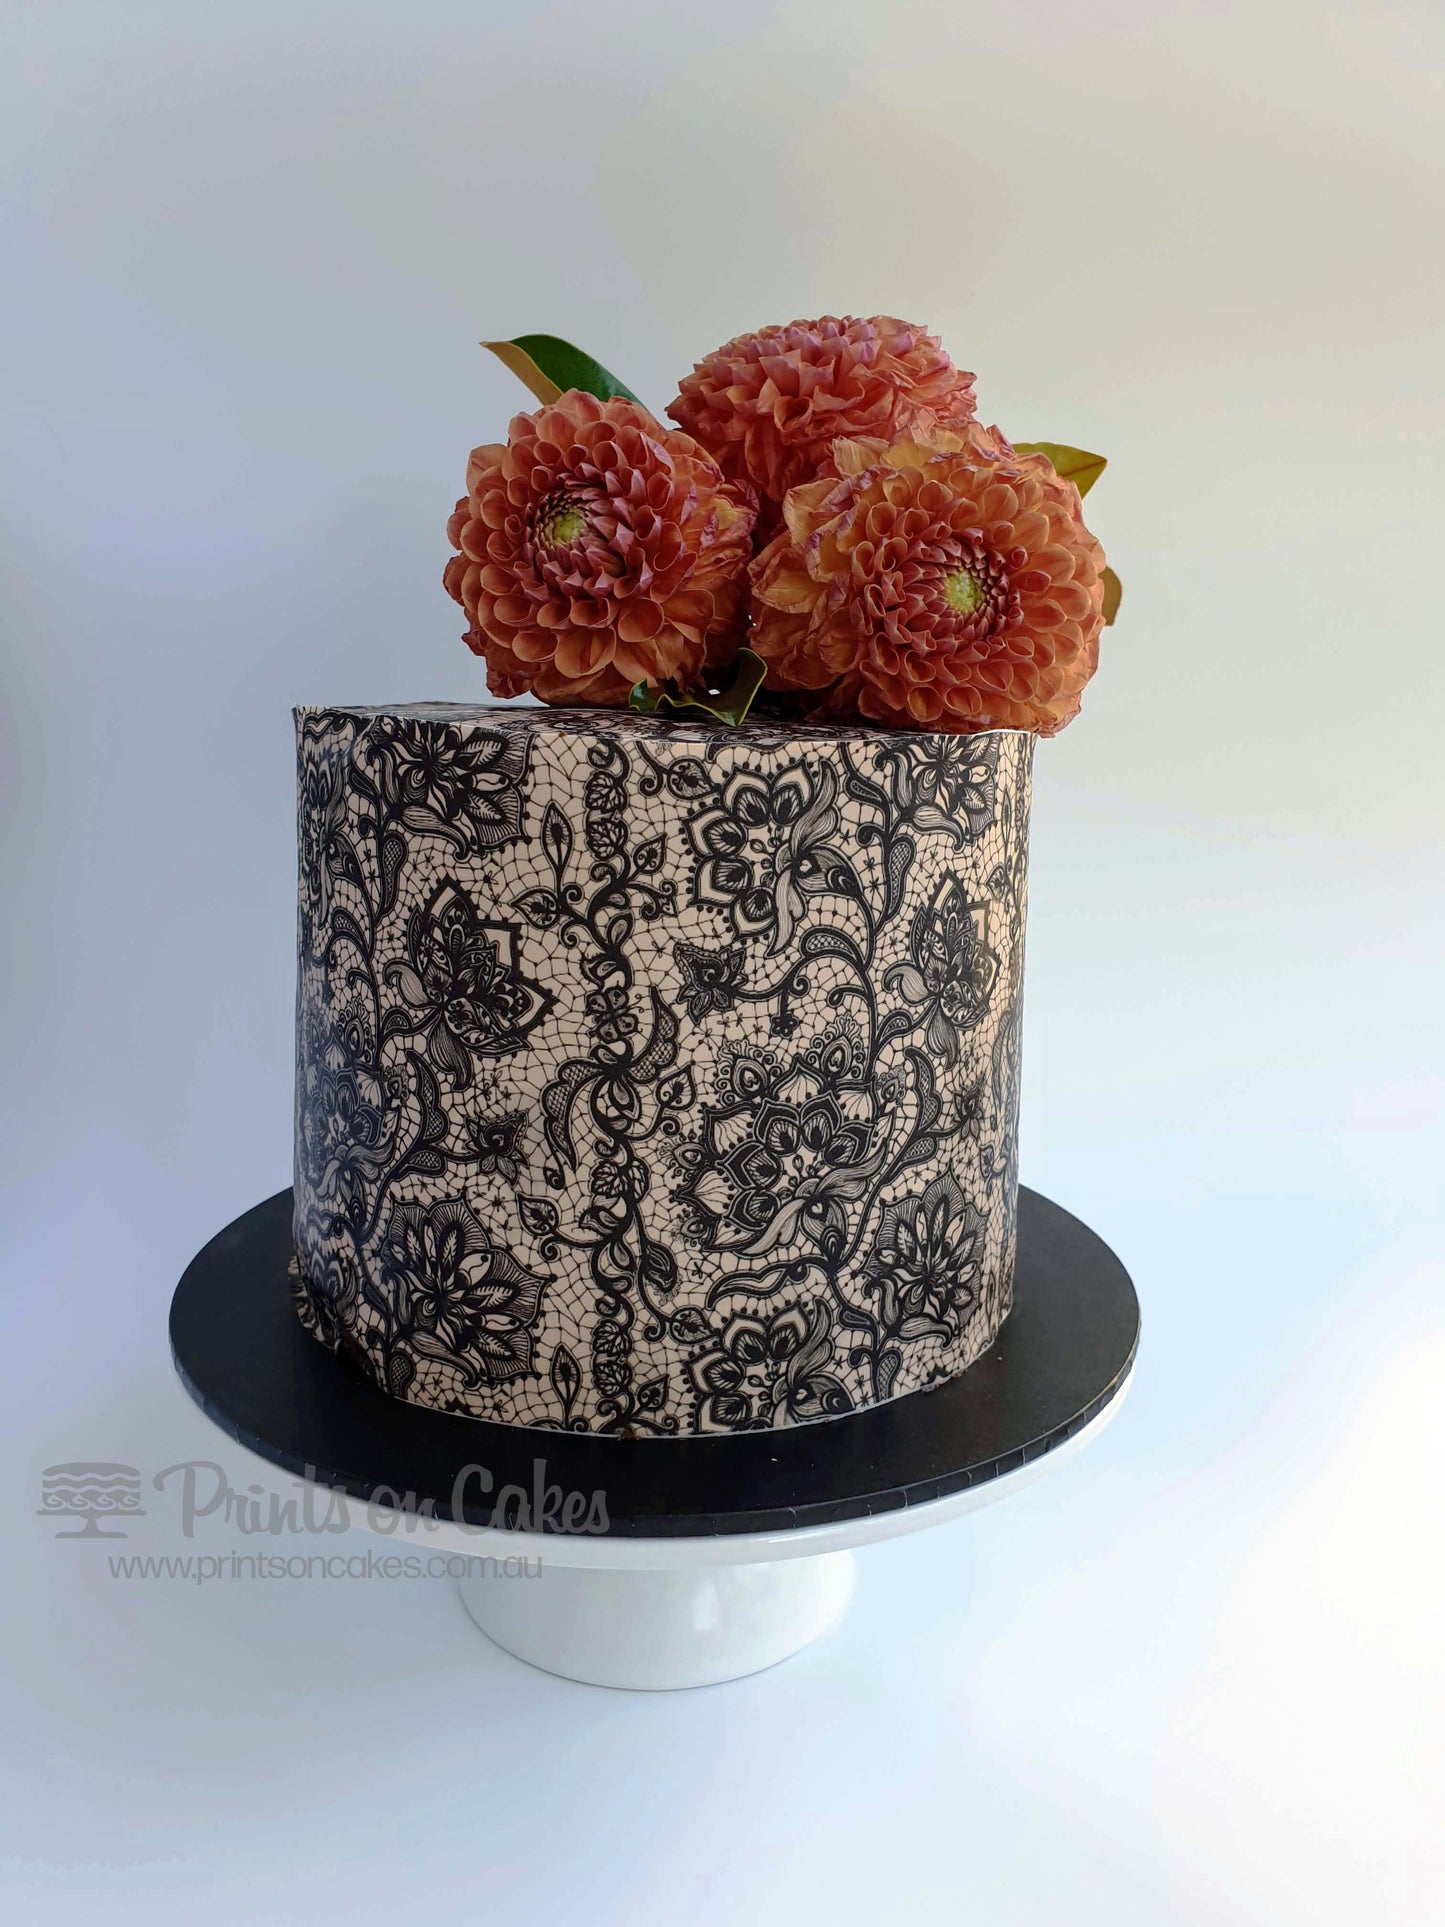 Lace Pattern with Flowers and Butterflies - Icing Cake Wrap Edible Cake Topper, Edible Cake Image, ,printsoncakes